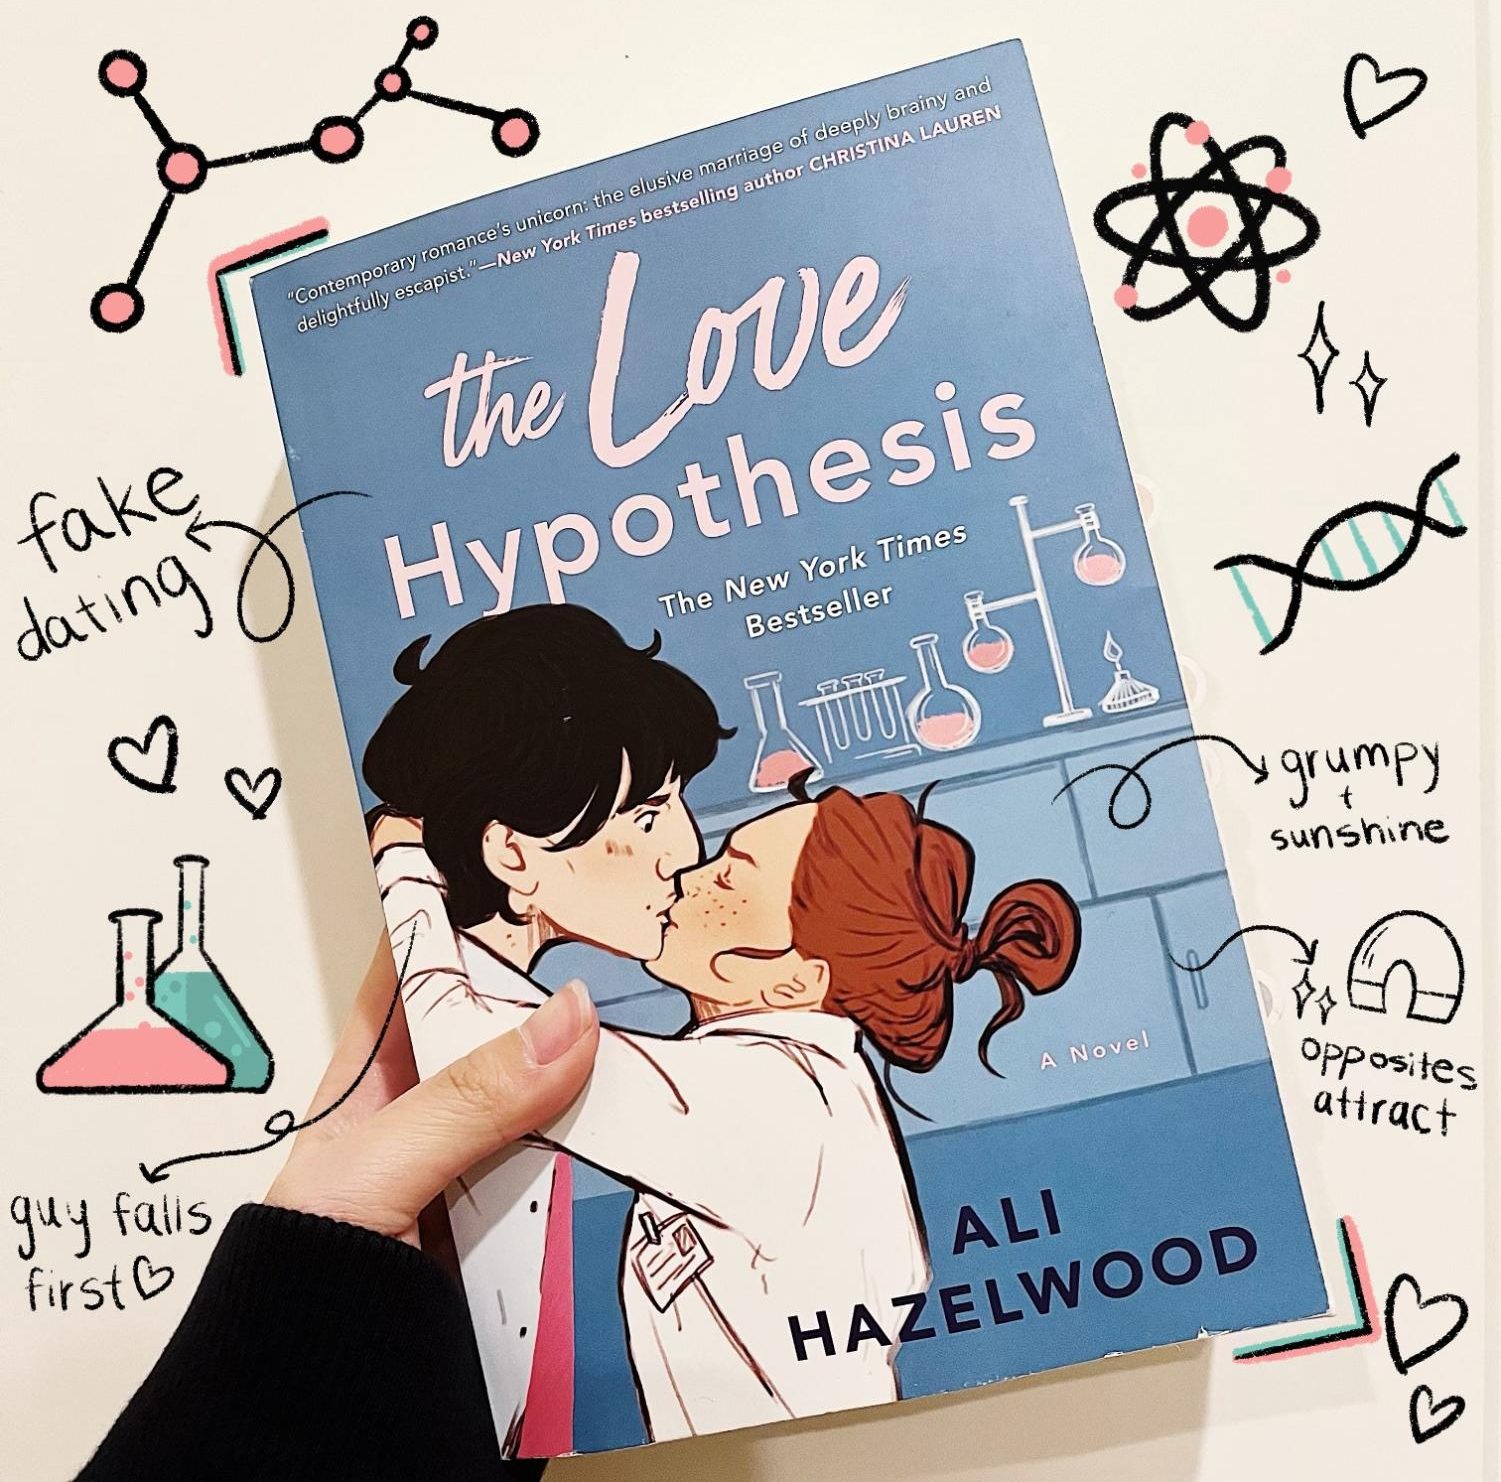 love hypothesis based on